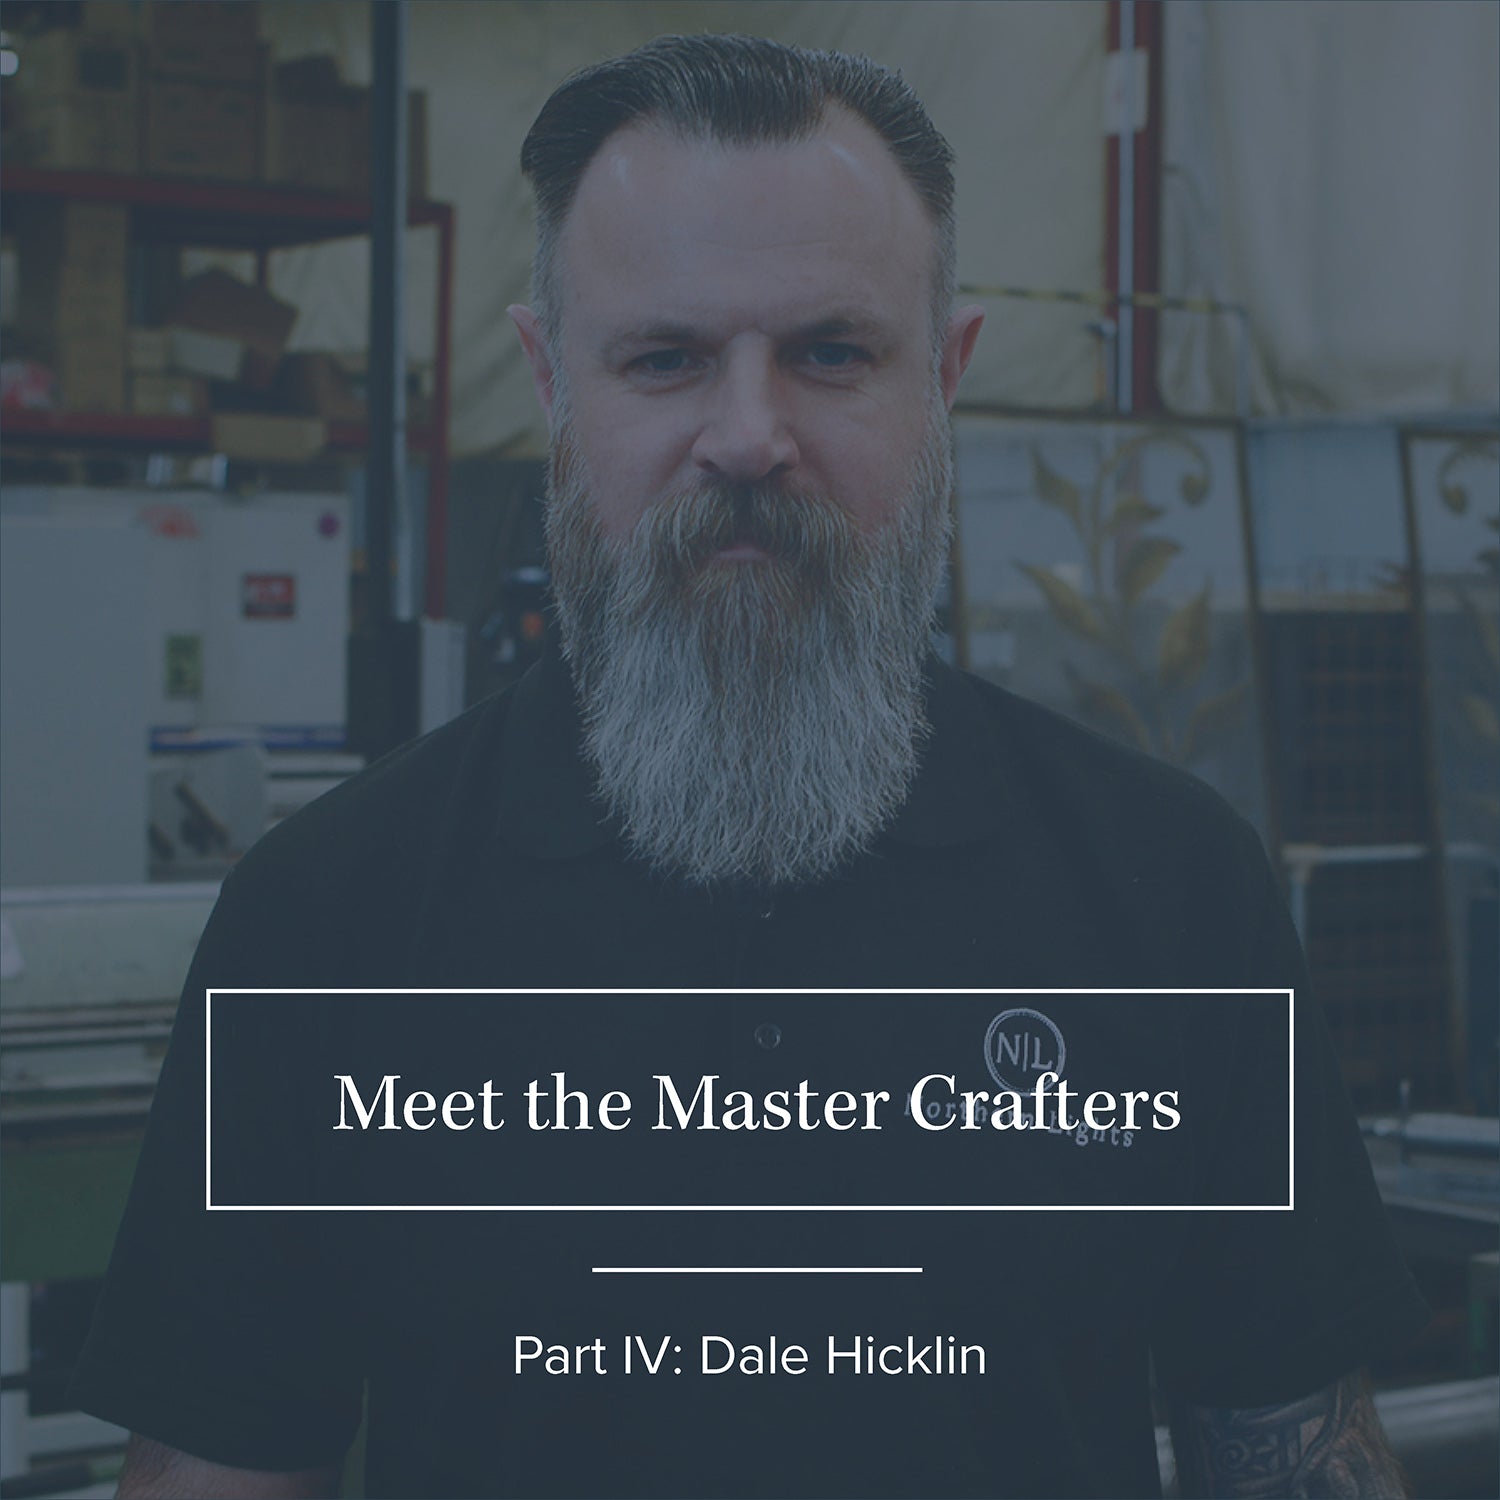 Meet the Master Crafters: Part IV